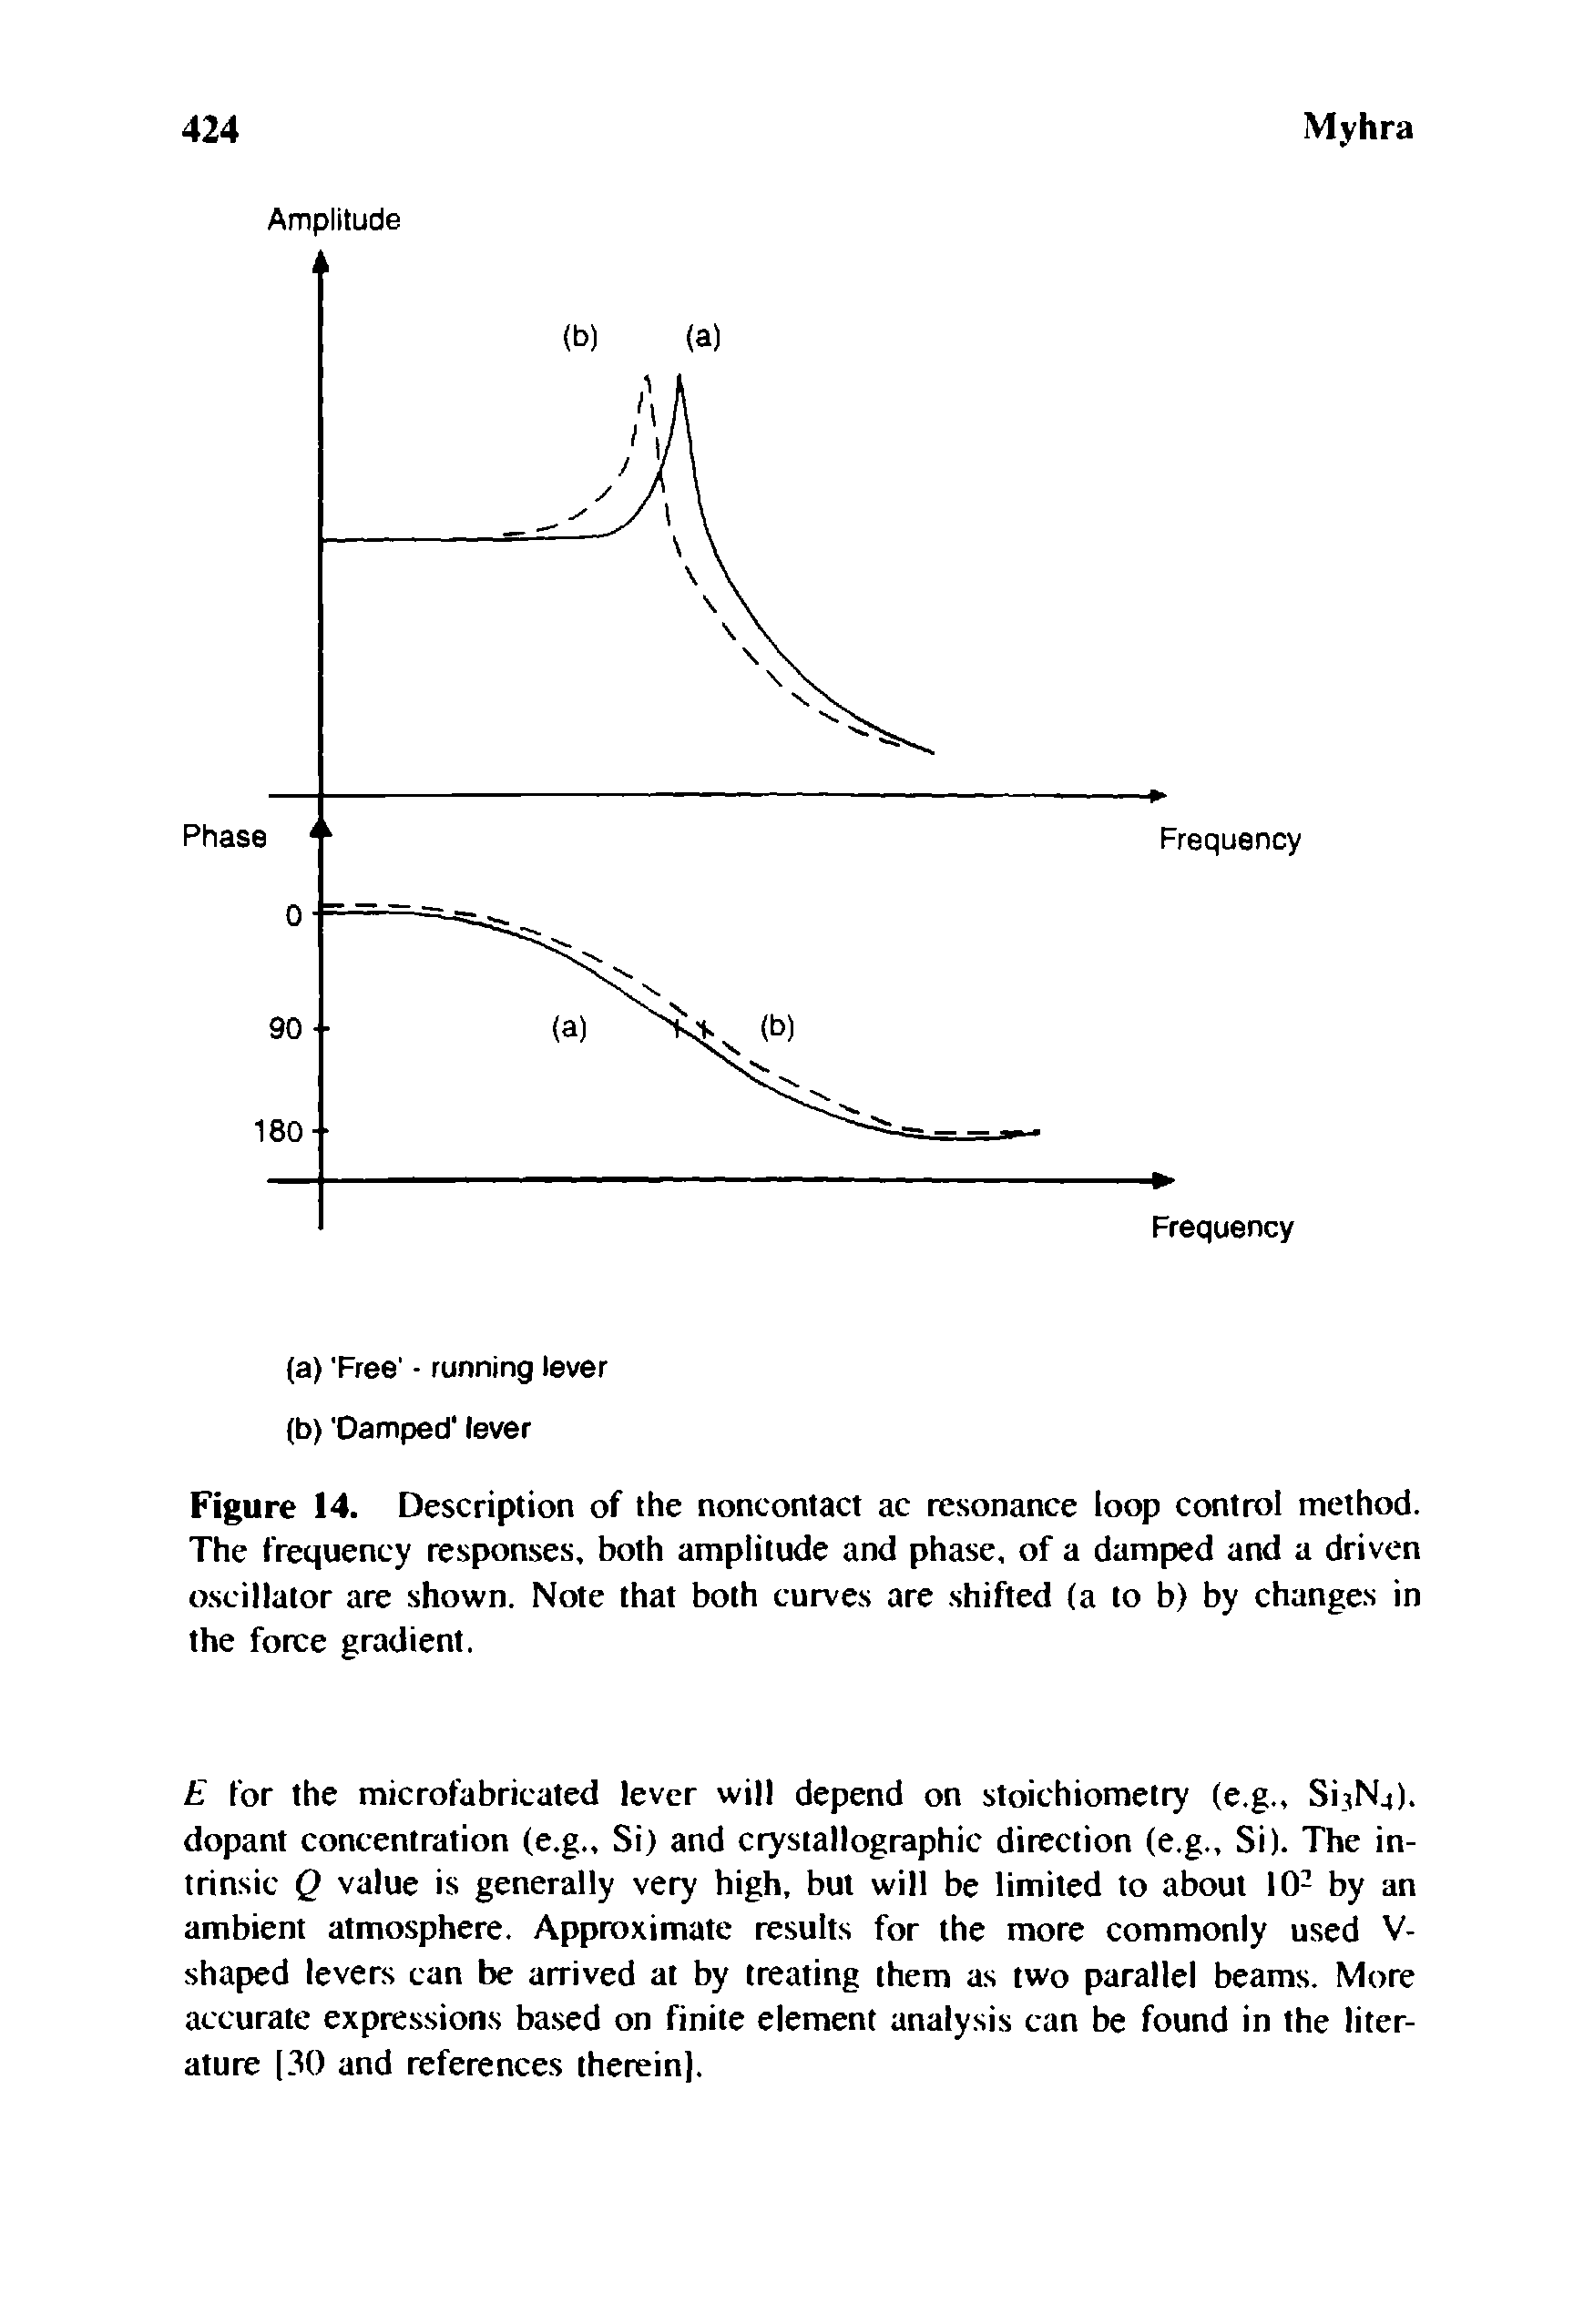 Figure 14. Description of the noncontact ac resonance loop control method. The frequency responses, both amplitude and phase, of a damped and a driven oscillator are shown. Note that both curves are shifted (a to b) by changes in the force gradient.